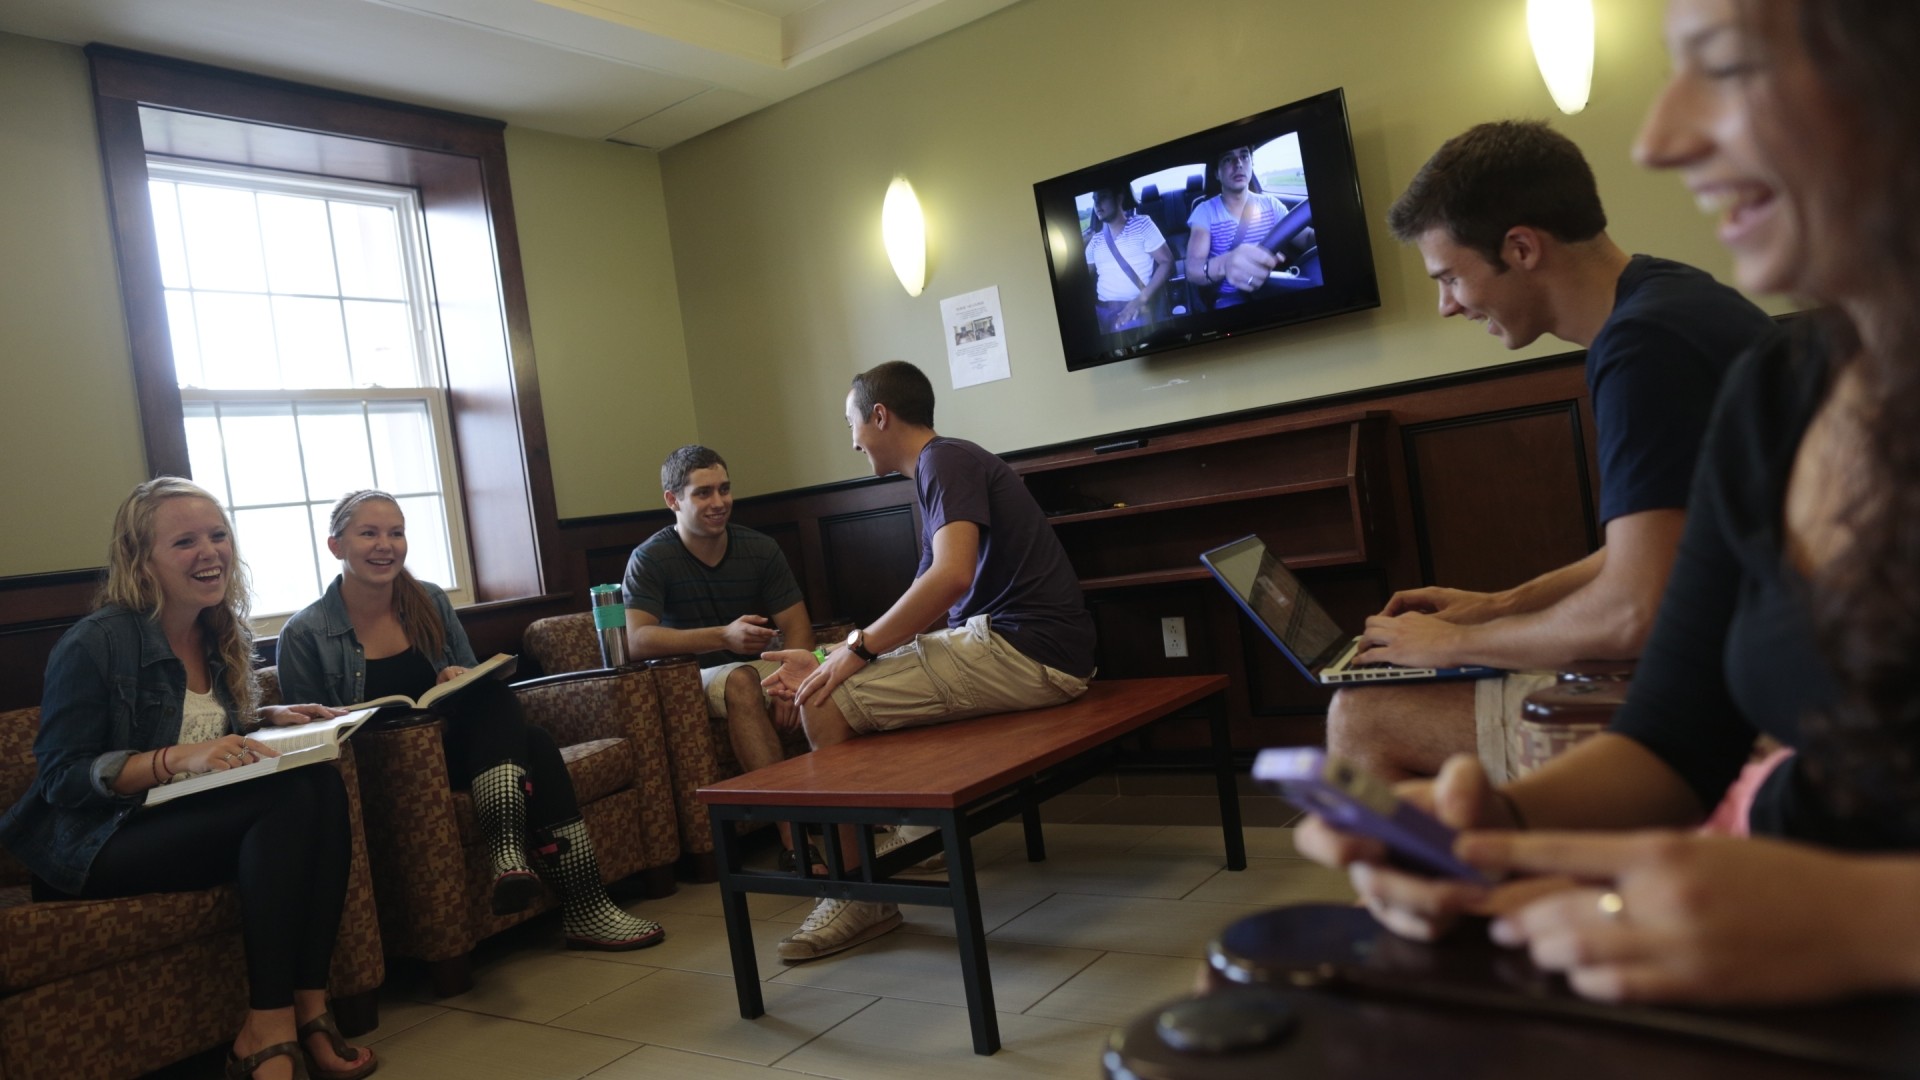 Students interacting in the Bishops Hall lounge area. There are multiple sofa chairs, a coffee table and a TV on the wall.